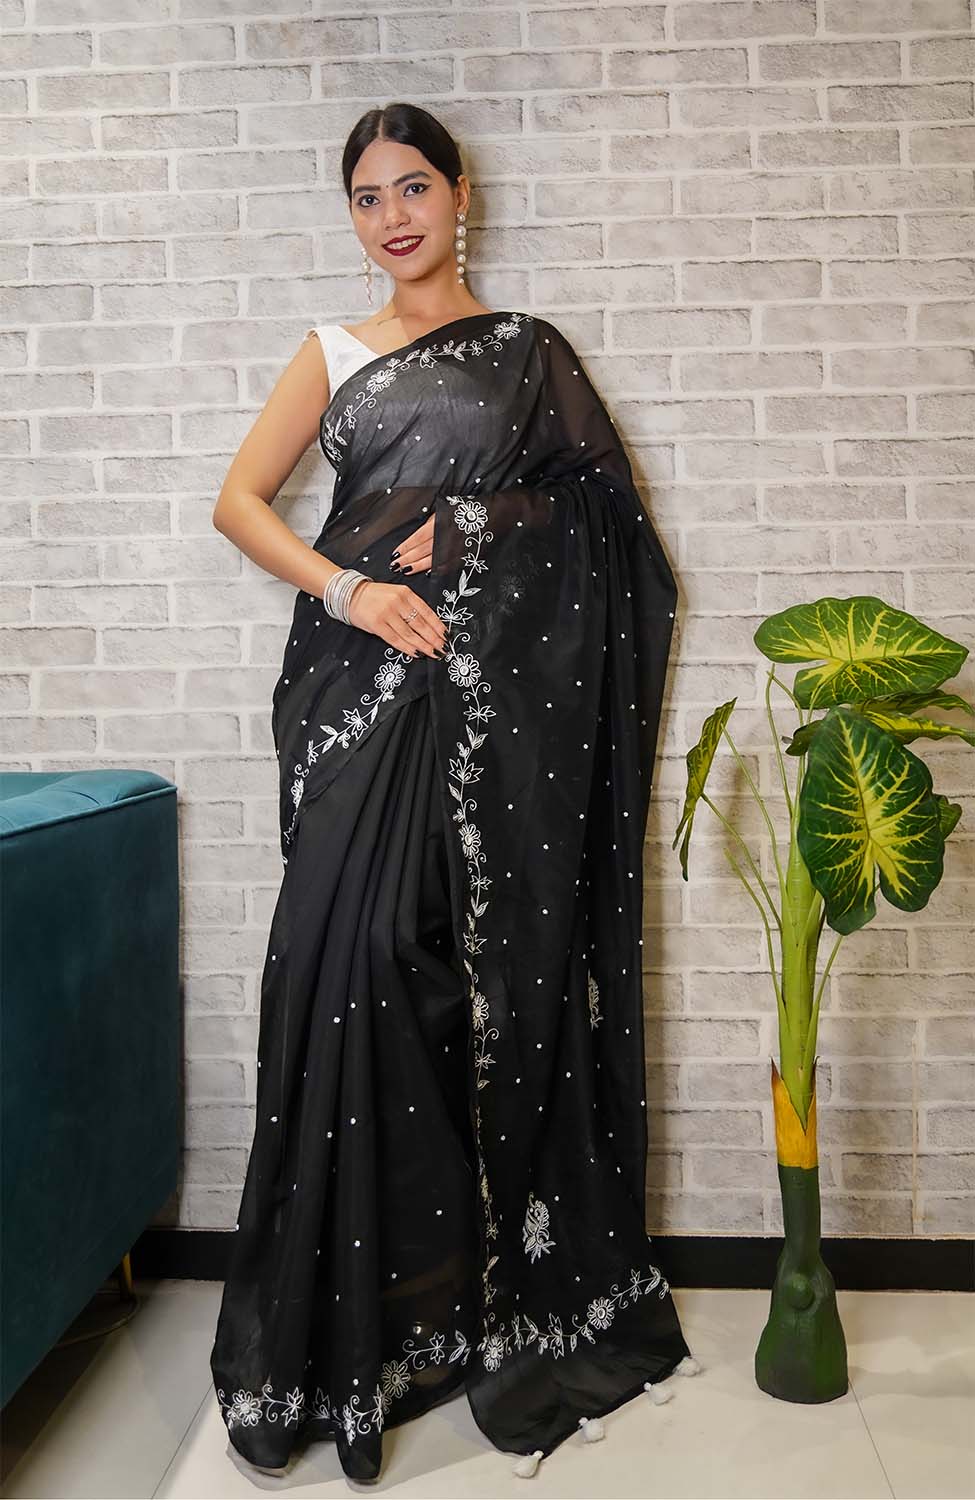 Ready To Wear Premium Cotton With Detailed Thread Work And Moti embedded Tassels on Pallu Wrap In One Minute Saree - Isadora Life